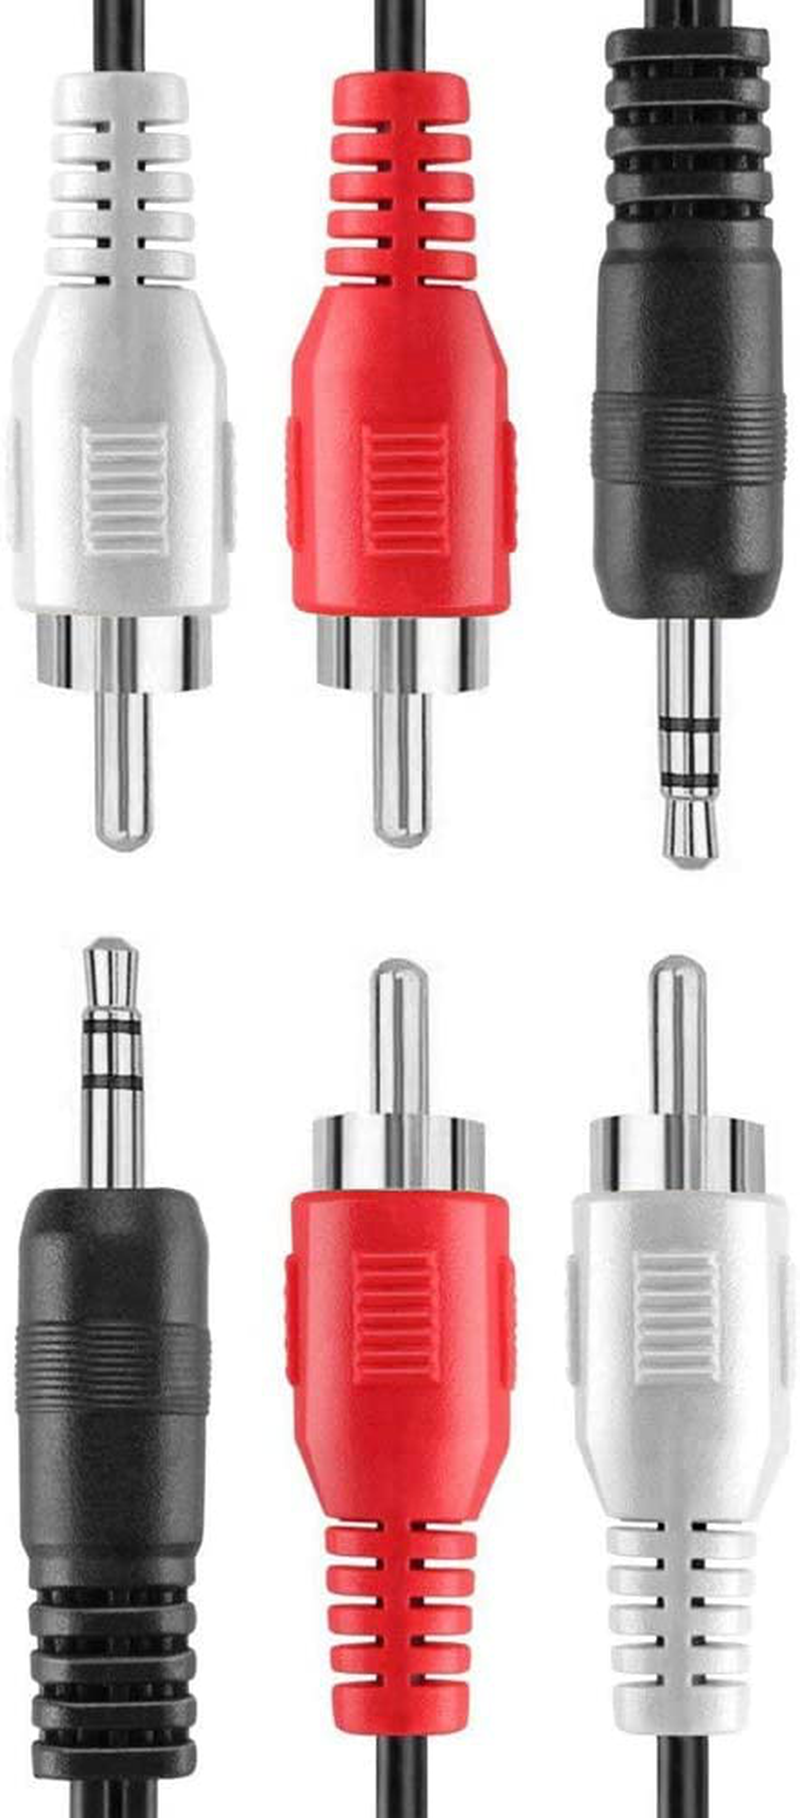 Padarsey RCA 10FT Audio/Video Composite Cable DVD/VCR/SAT Yellow/White/red connectors 3 Male to 3 Male Electronics > Electronics Accessories > Cables > Audio & Video Cables Padarsey 3.5mm male to 2rca Male 2 Pack  